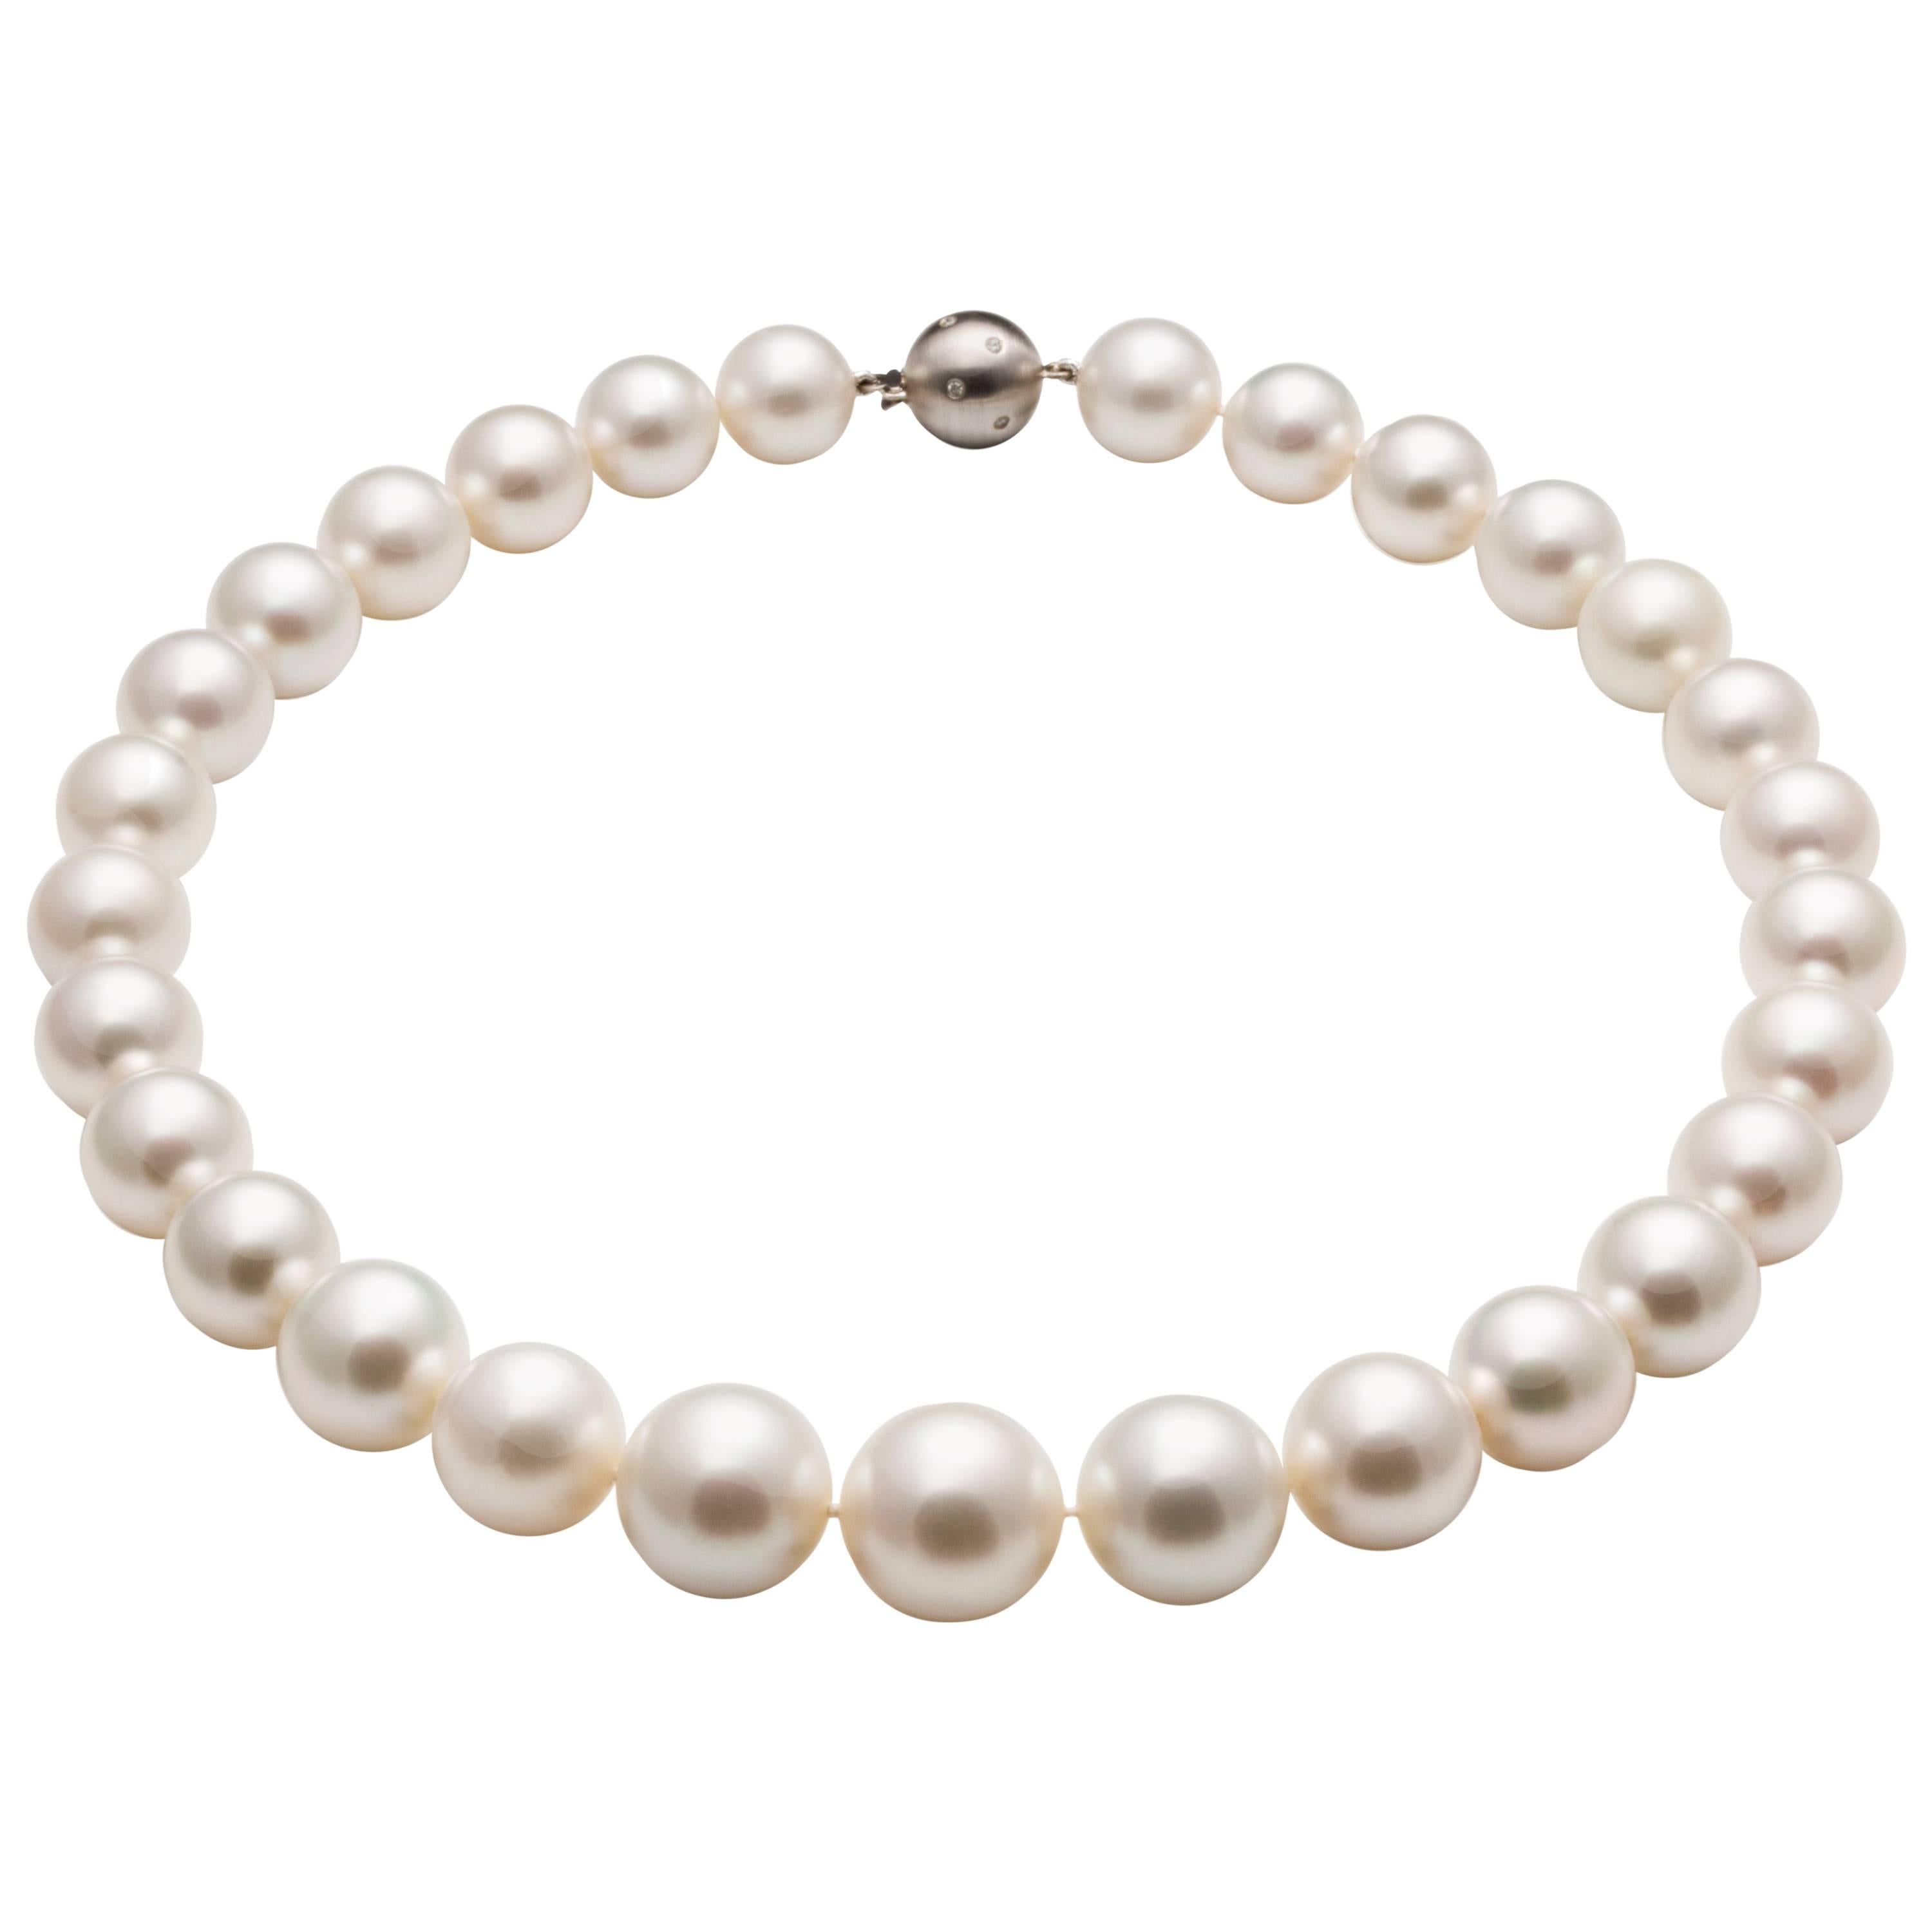 Australian High Luster White 13-18.7mm South Sea Round Pearl Necklace For Sale